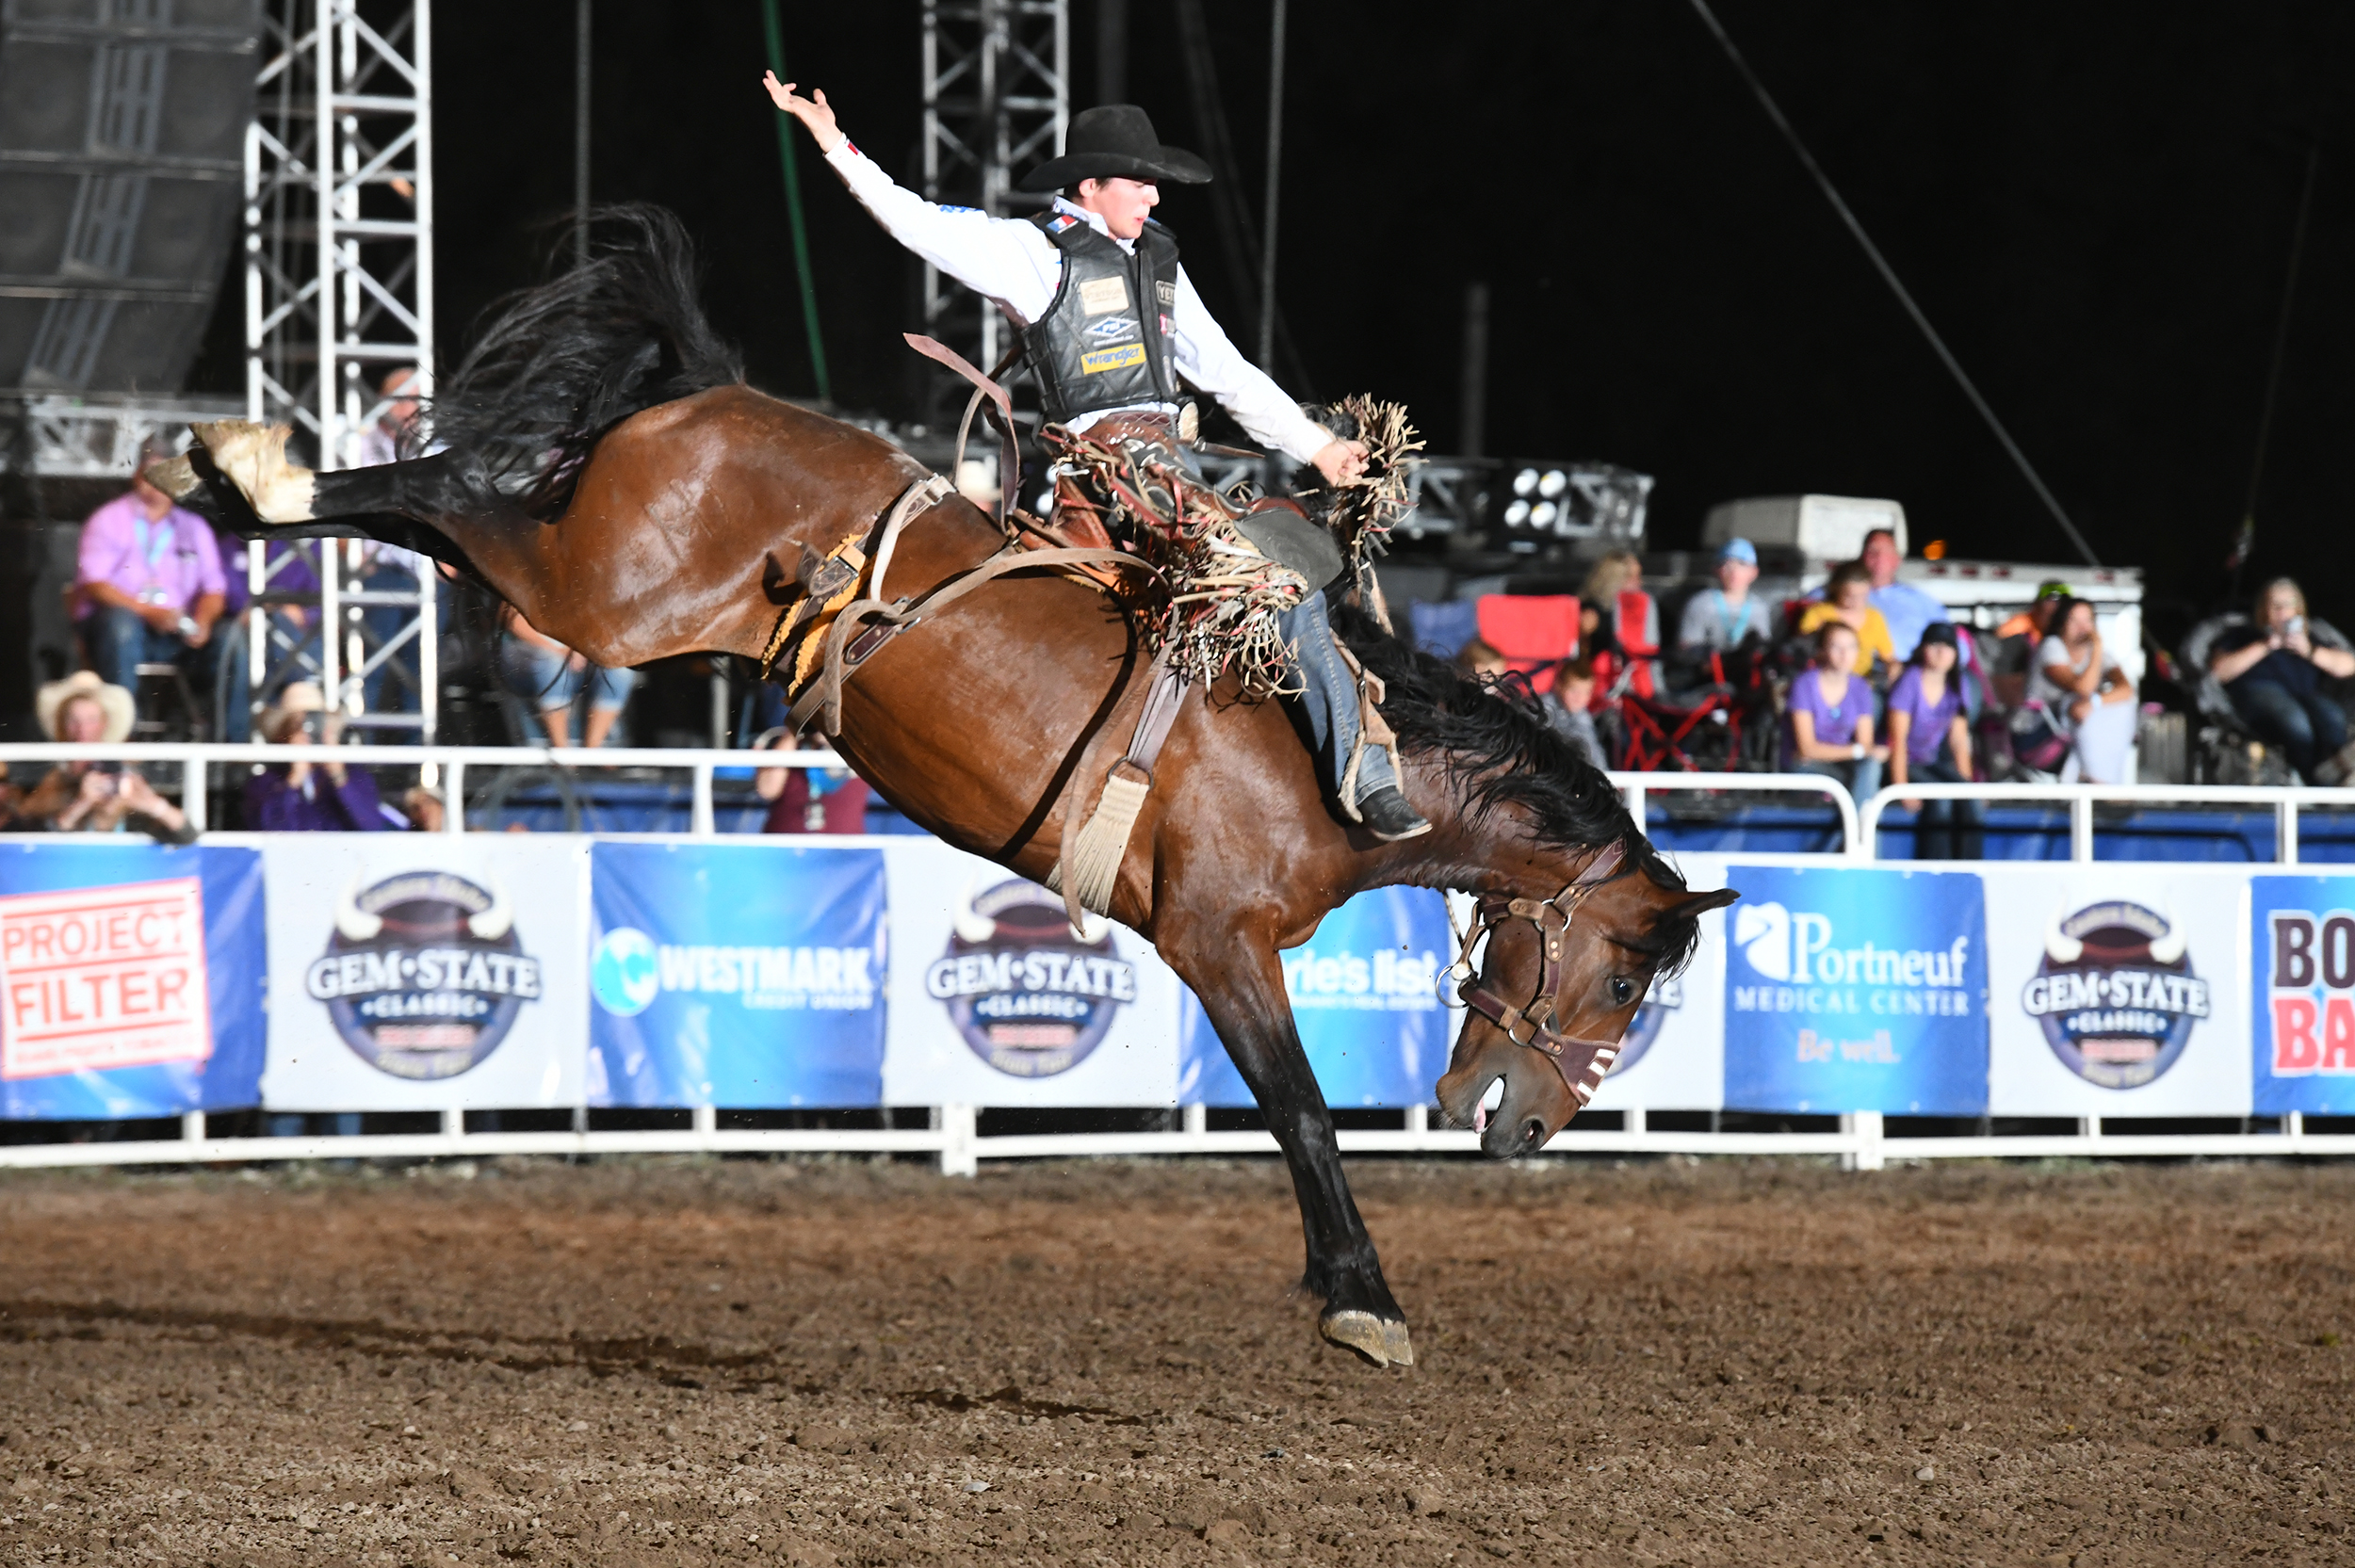 Stetson Wright, a PRCA rookie who sits No. 1 in the all-around world standings, won saddle bronc riding at the Gem State Classic Pro Rodeo with a 90-point ride on Powder River Rodeo's -38 Special. (PHOTO BY AMANDA DILLWORTH)